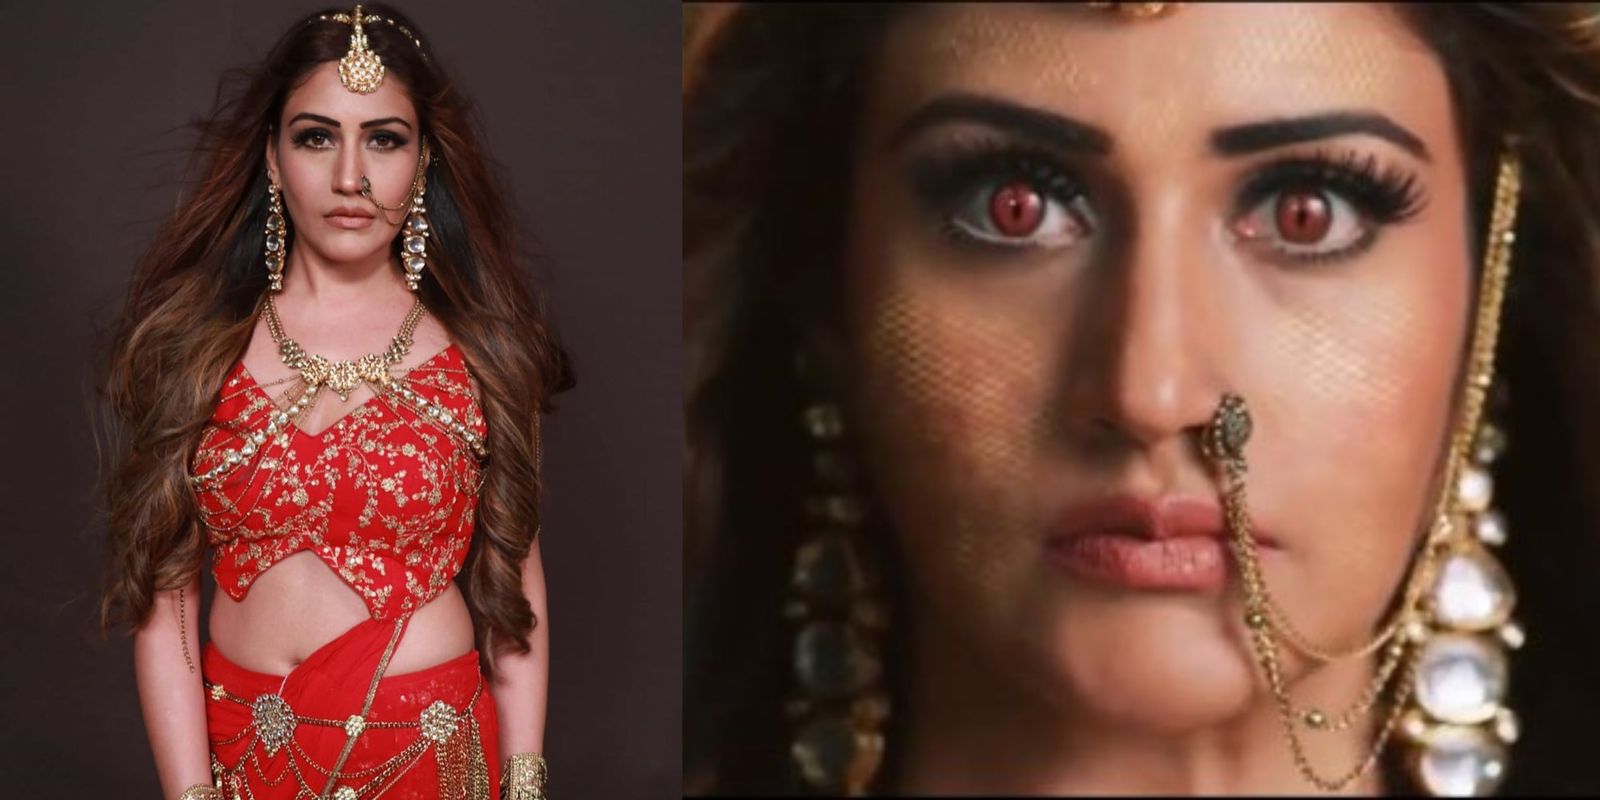 Surbhi Chandna On Her Character In Naagin 5: “My Focus Is To Put A Few Nuances Of Me In Bani”